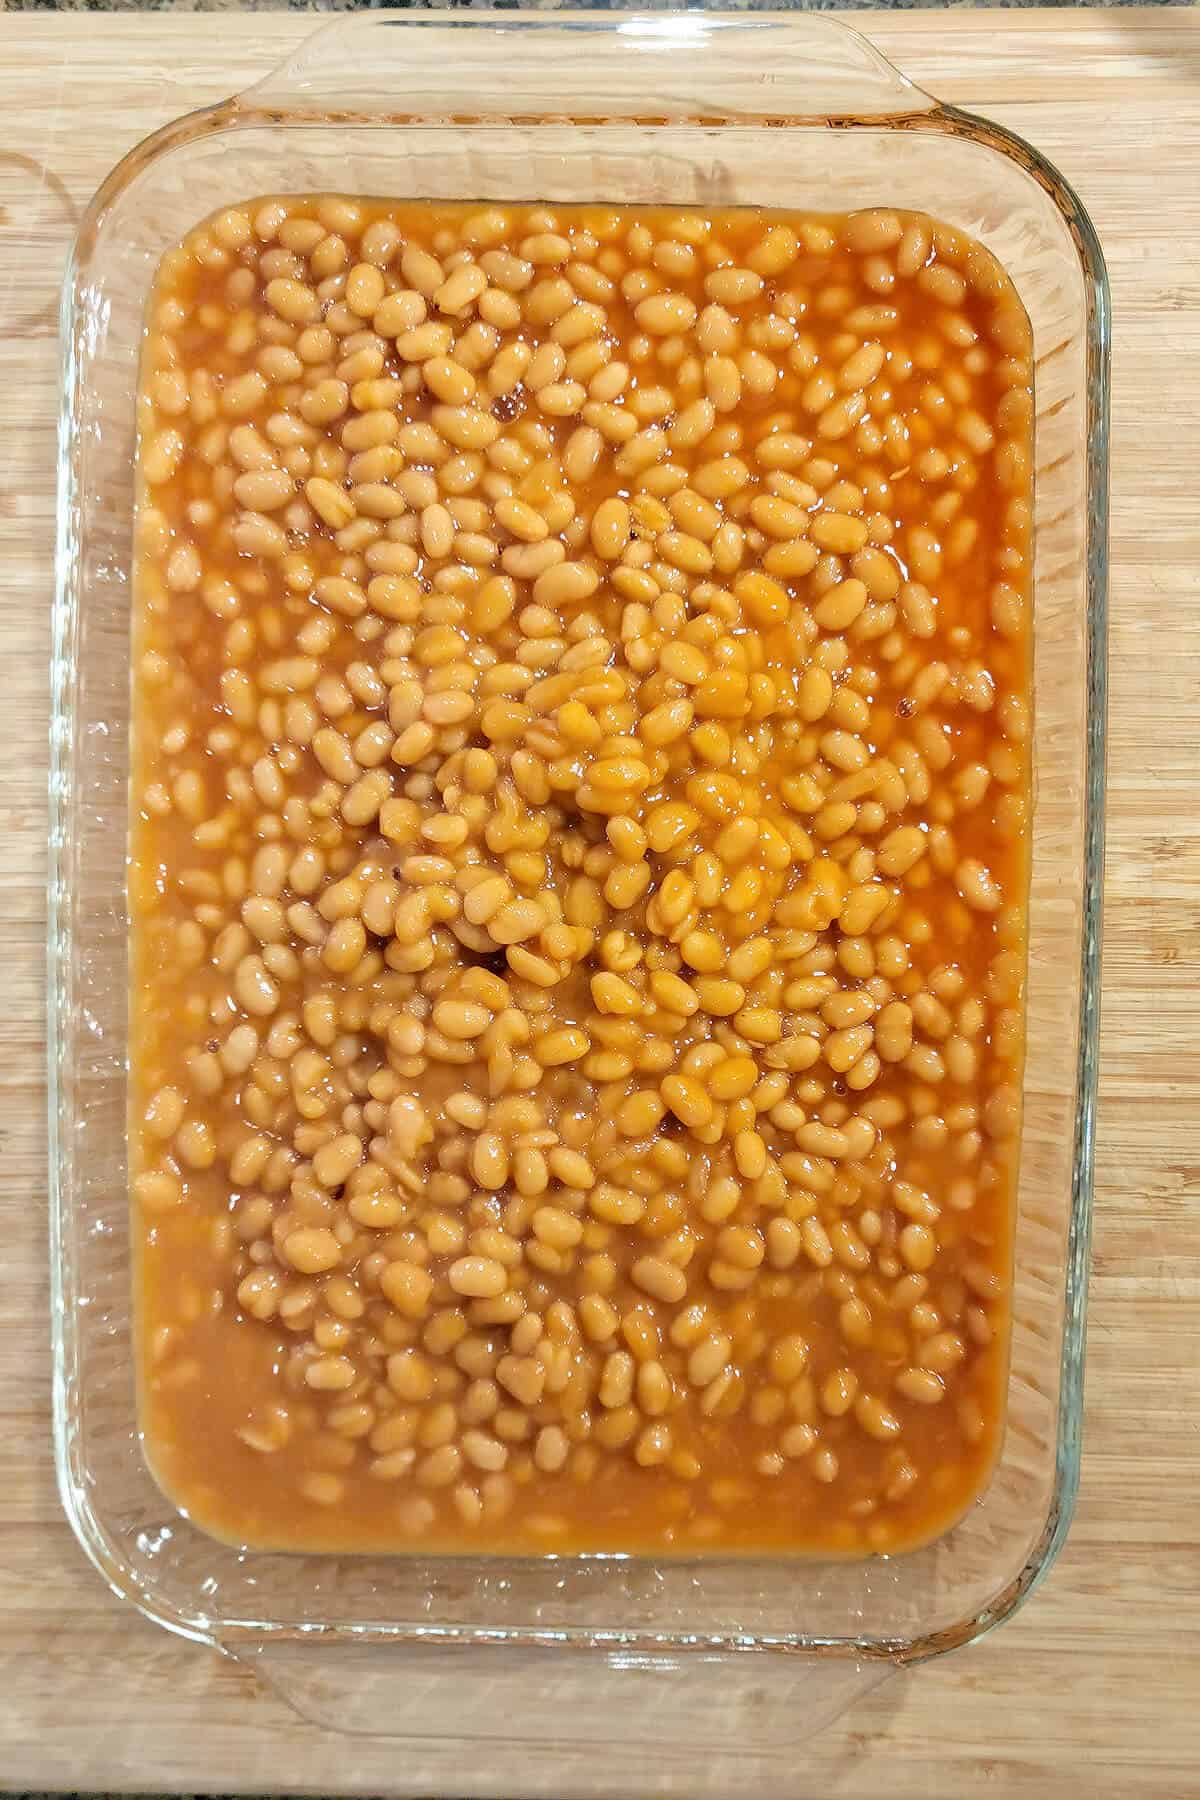 Lightly drained pork and beans in a casserole dish.